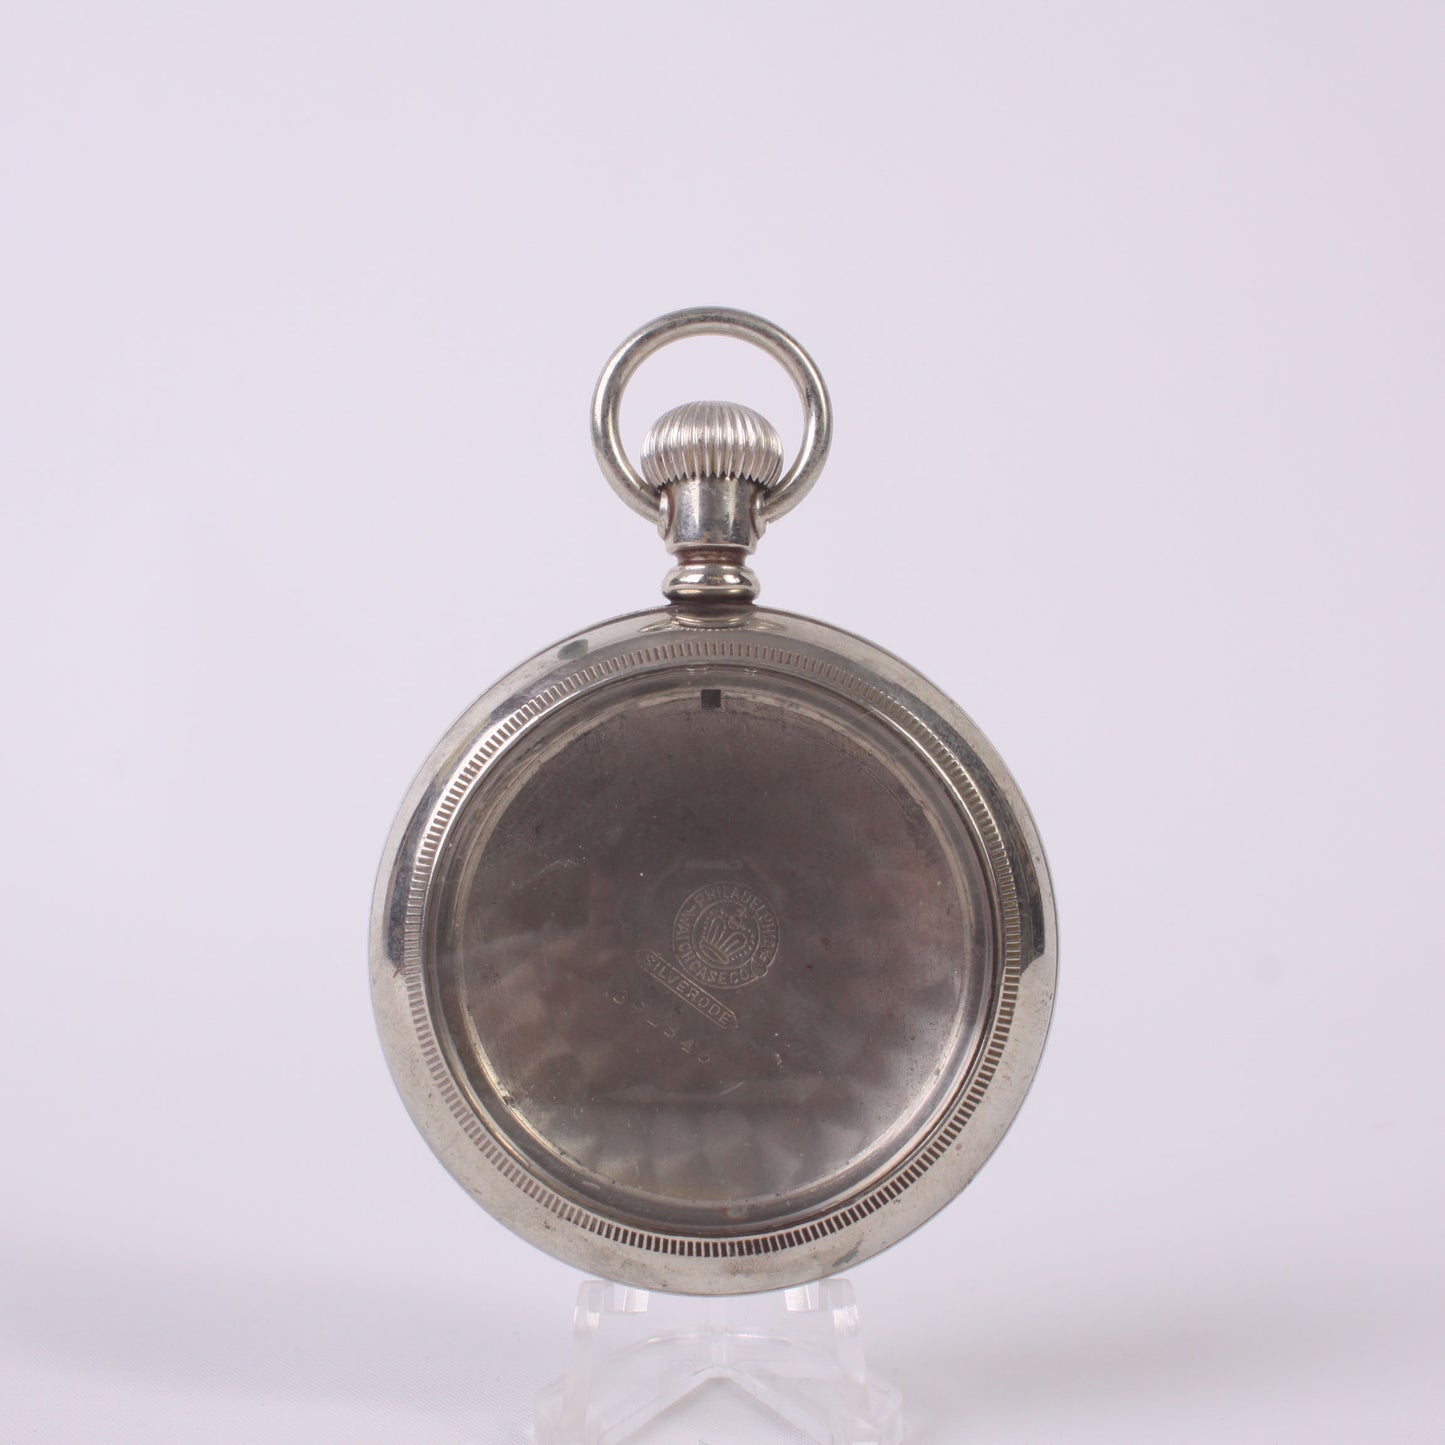 American 18 Size Screw Cover Nickel Pocket Watch Case